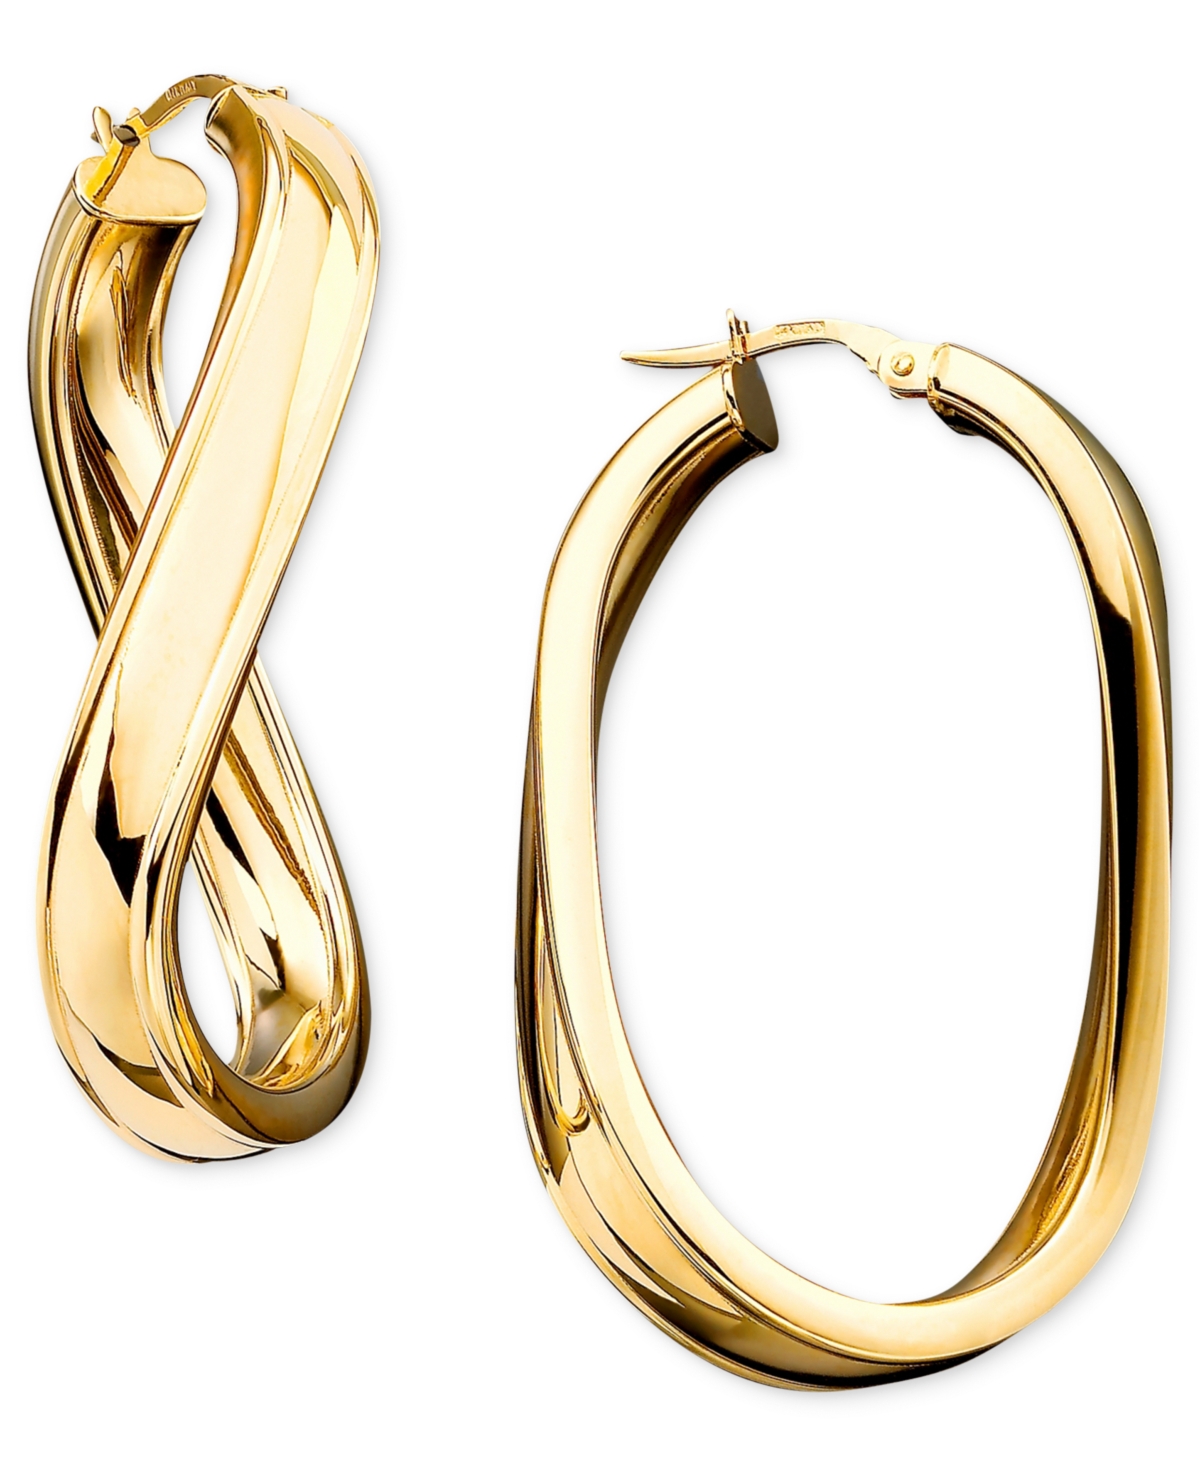 Twisted Oval Hoop Earrings in 14k Gold - Yellow Gold